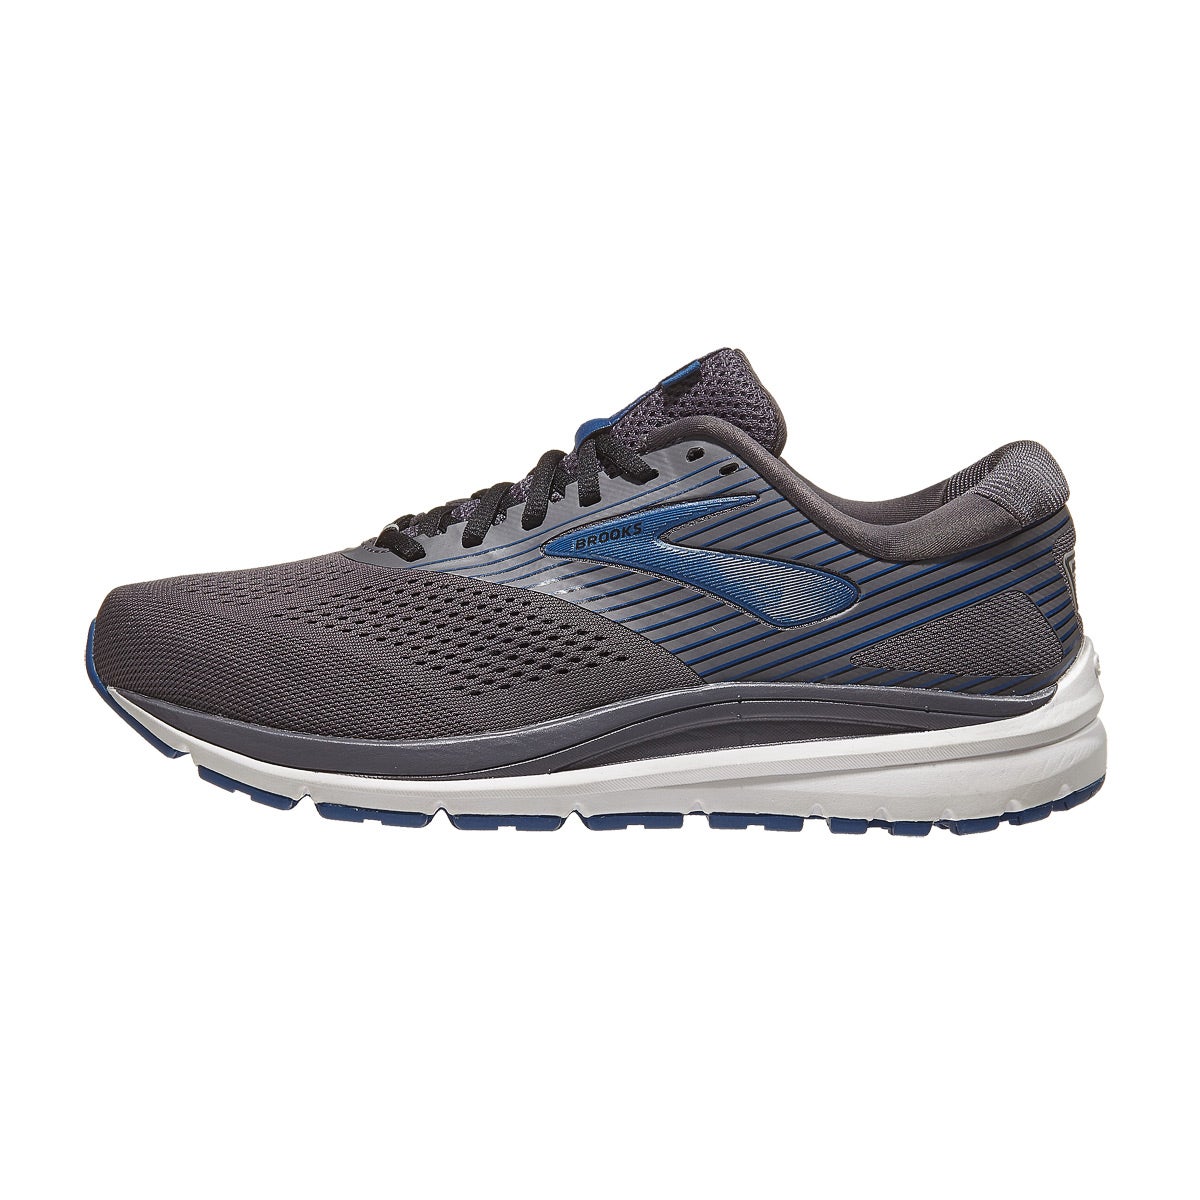 Brooks Addiction 14 Men's Shoes Blackened Pearl/Blue 360° View ...